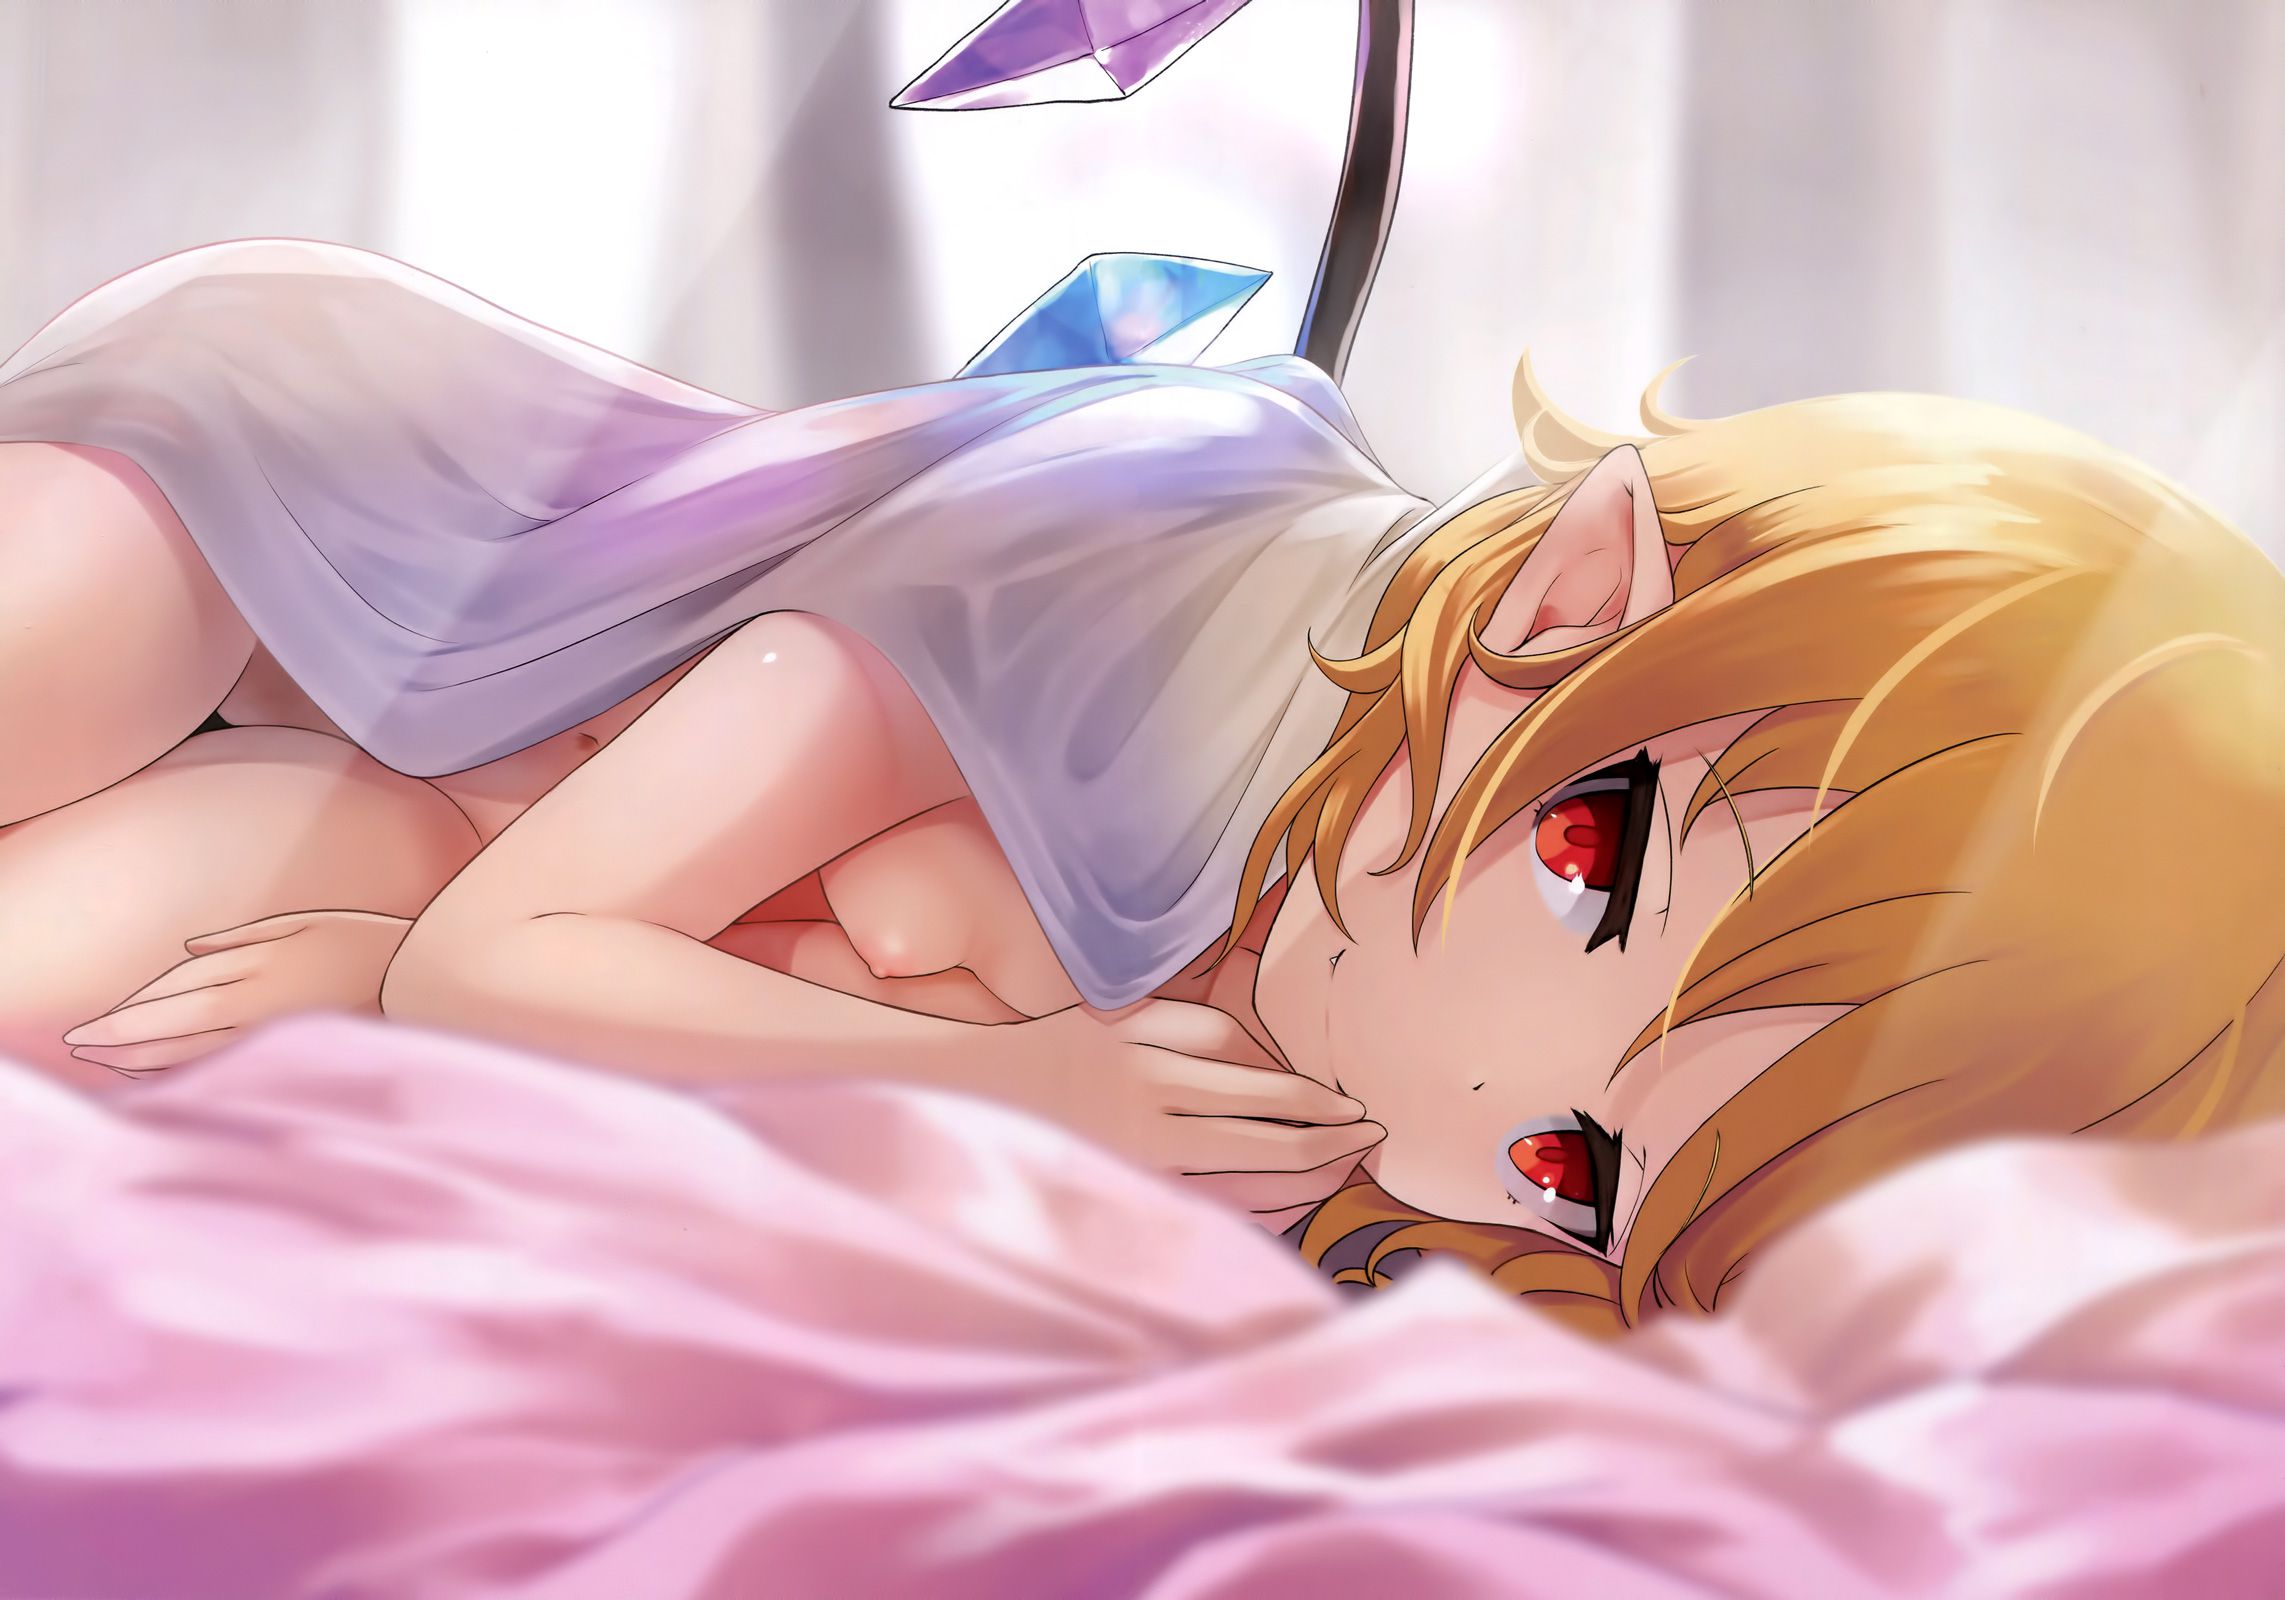 [Touhou] Secondary erotic images of female characters 3 70 photos 9